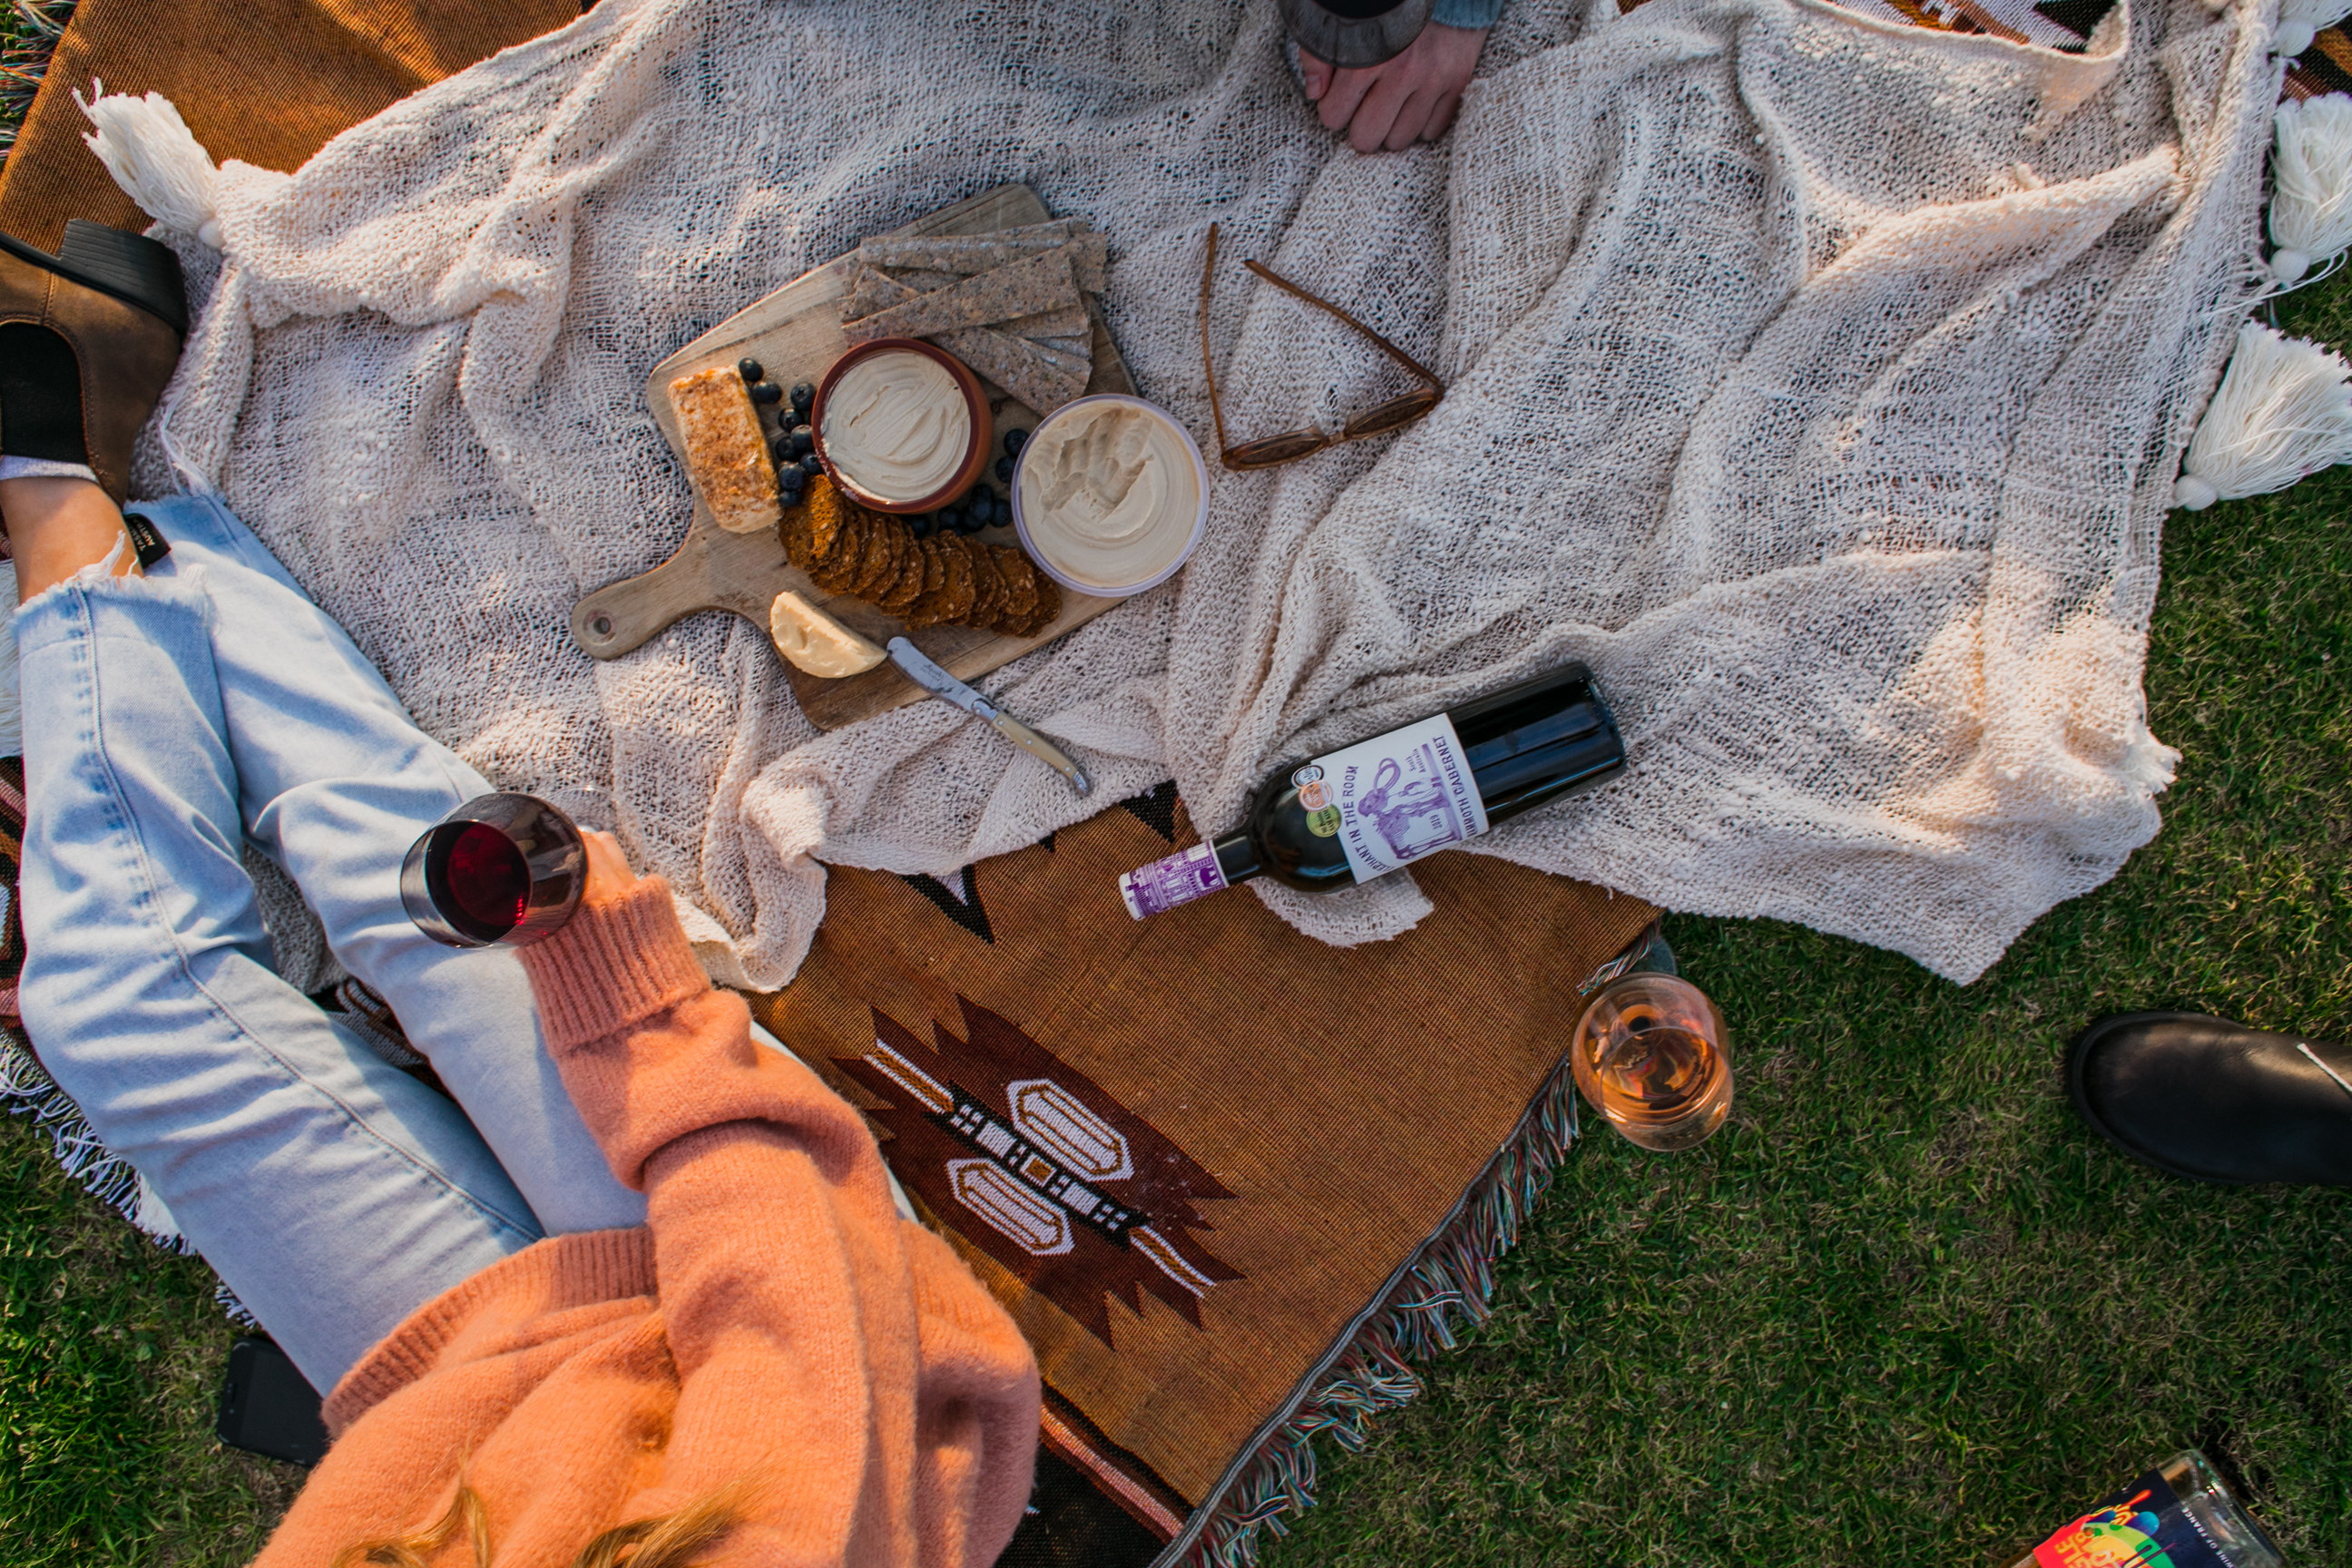 A woman having picnic with wine